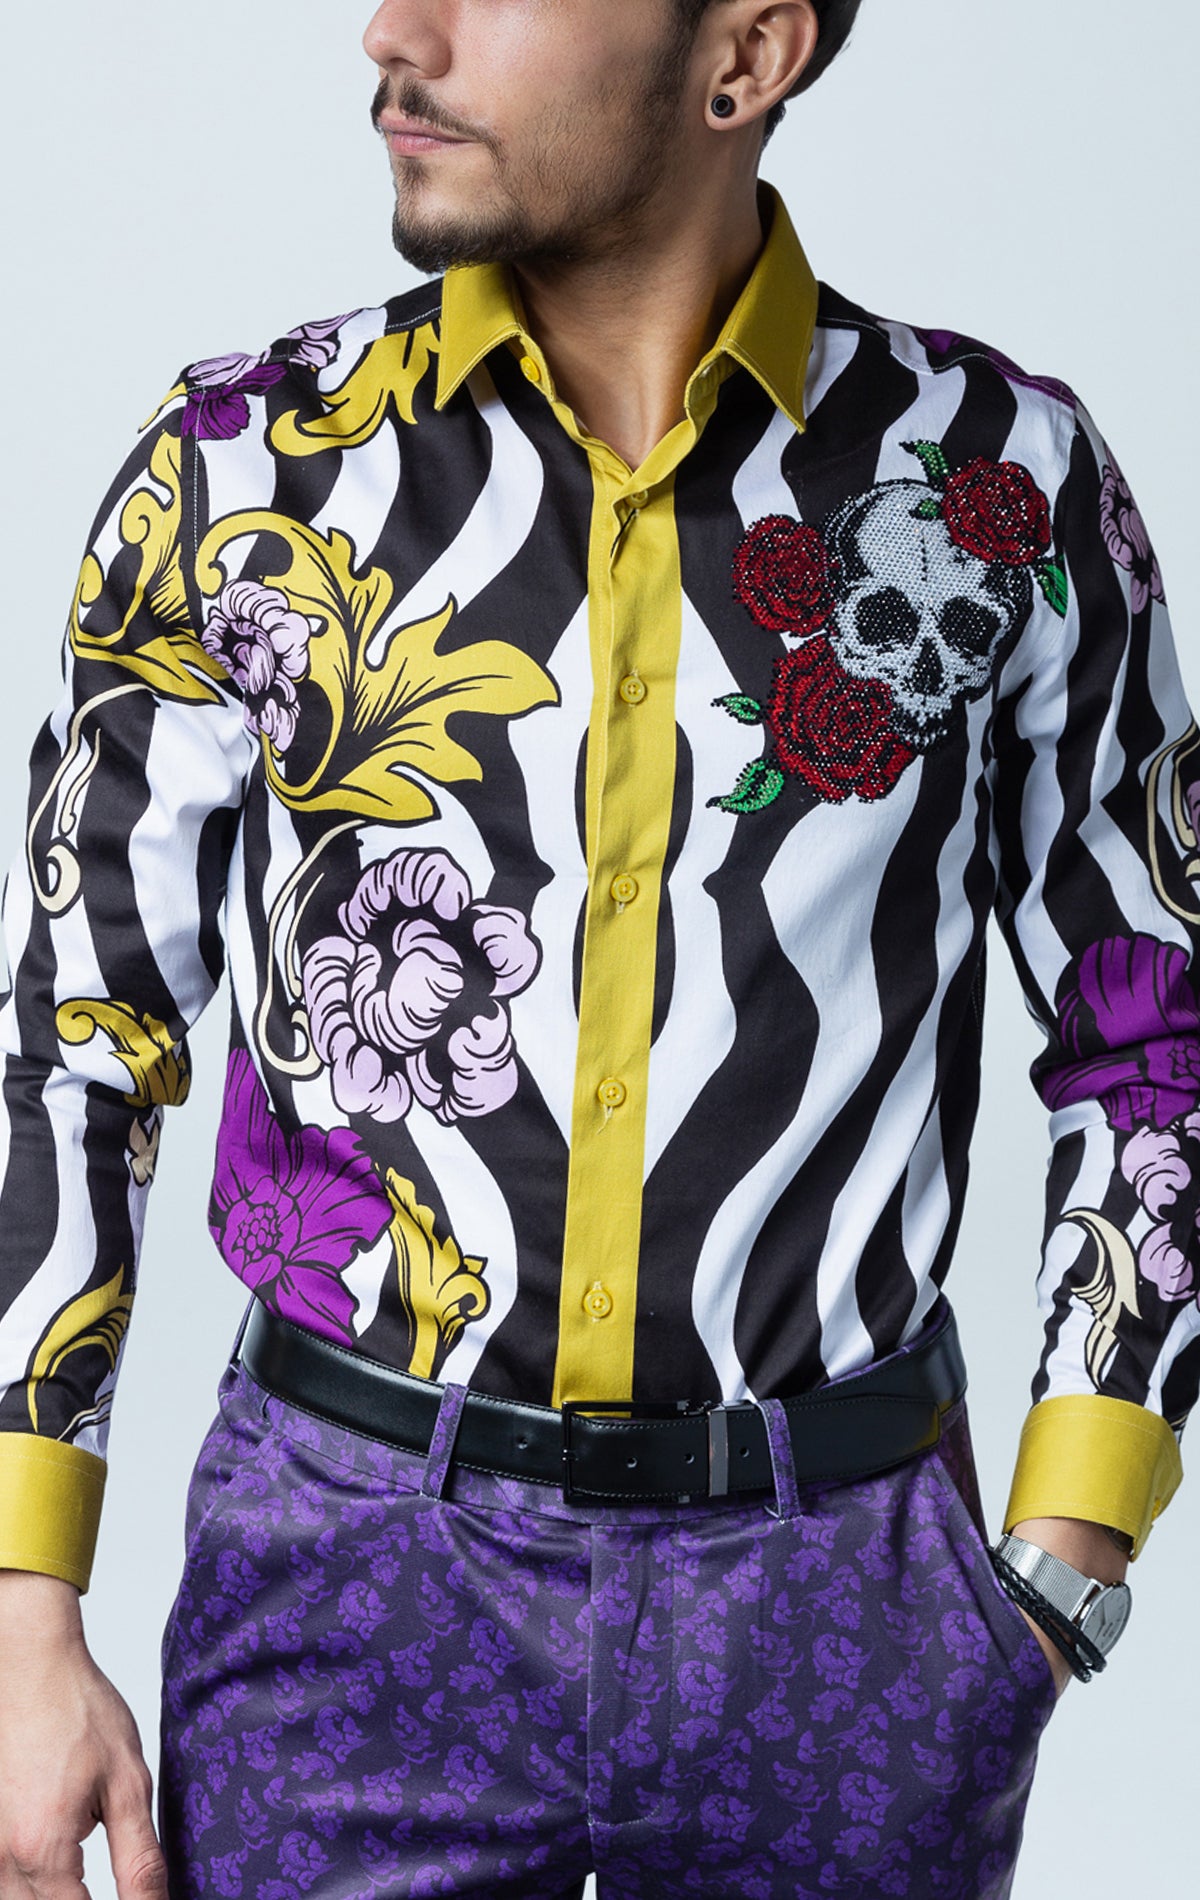 BRC Adana button up shirt with skull design and added crystals